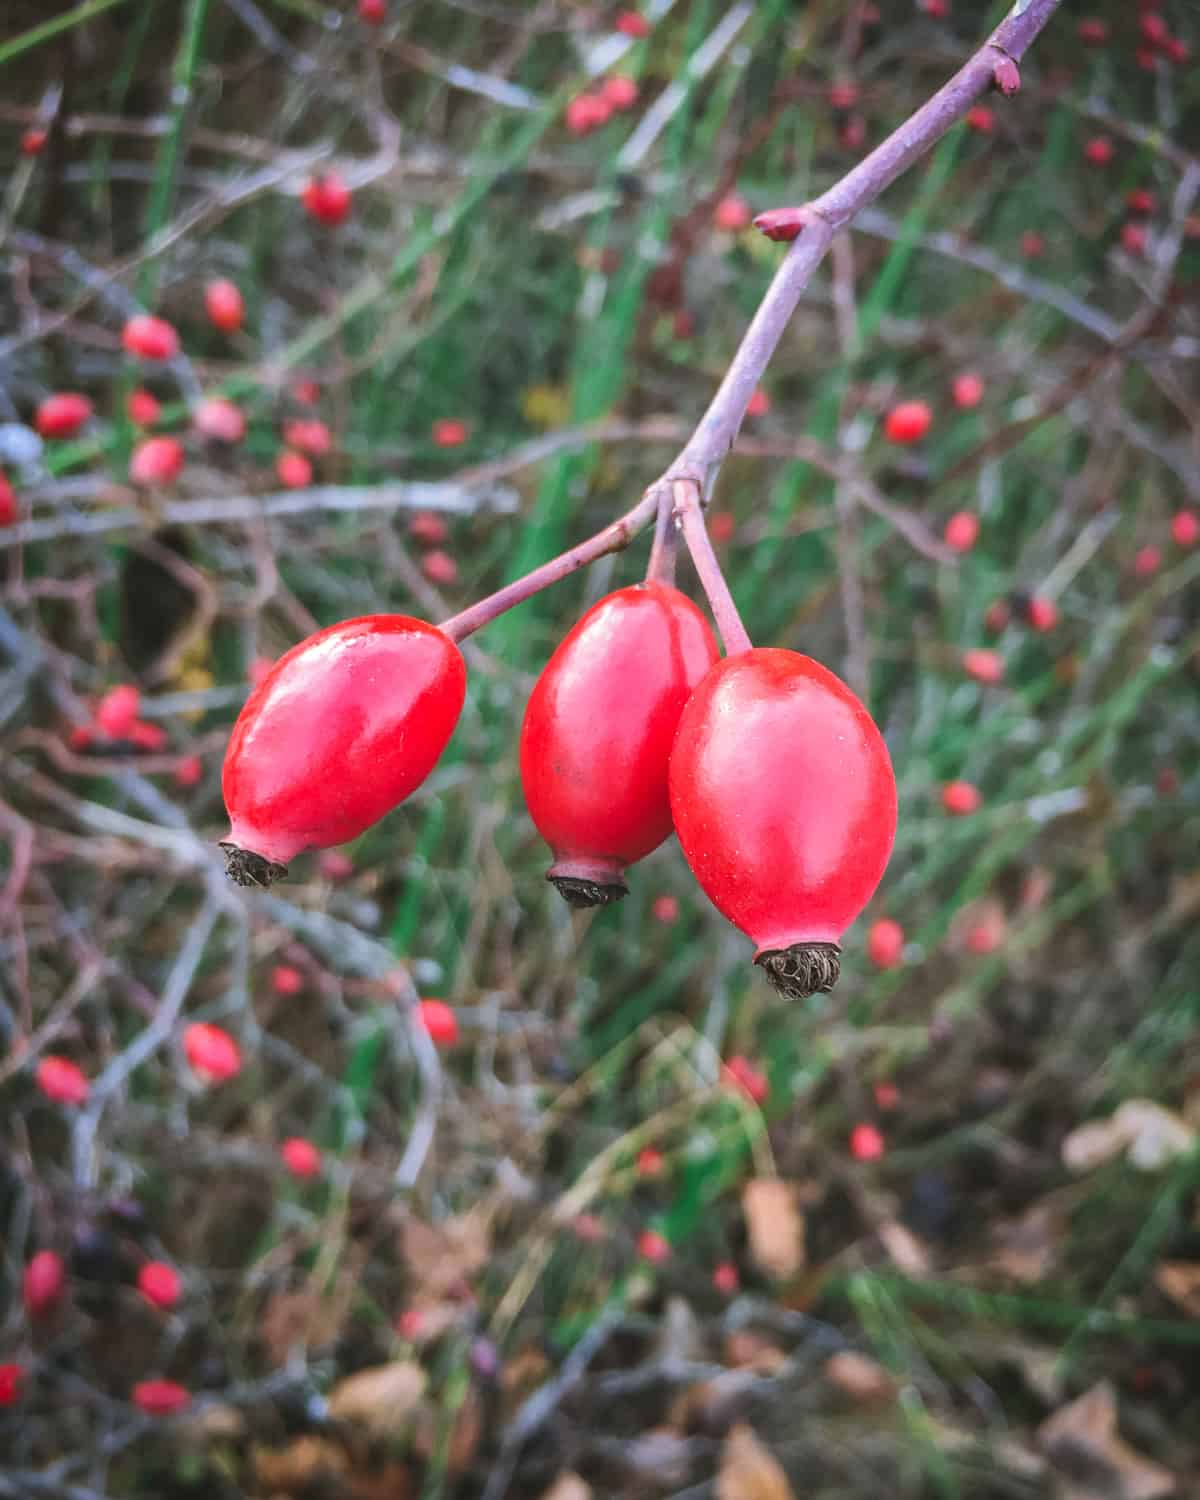 3 rose hips hanging from a branch. 